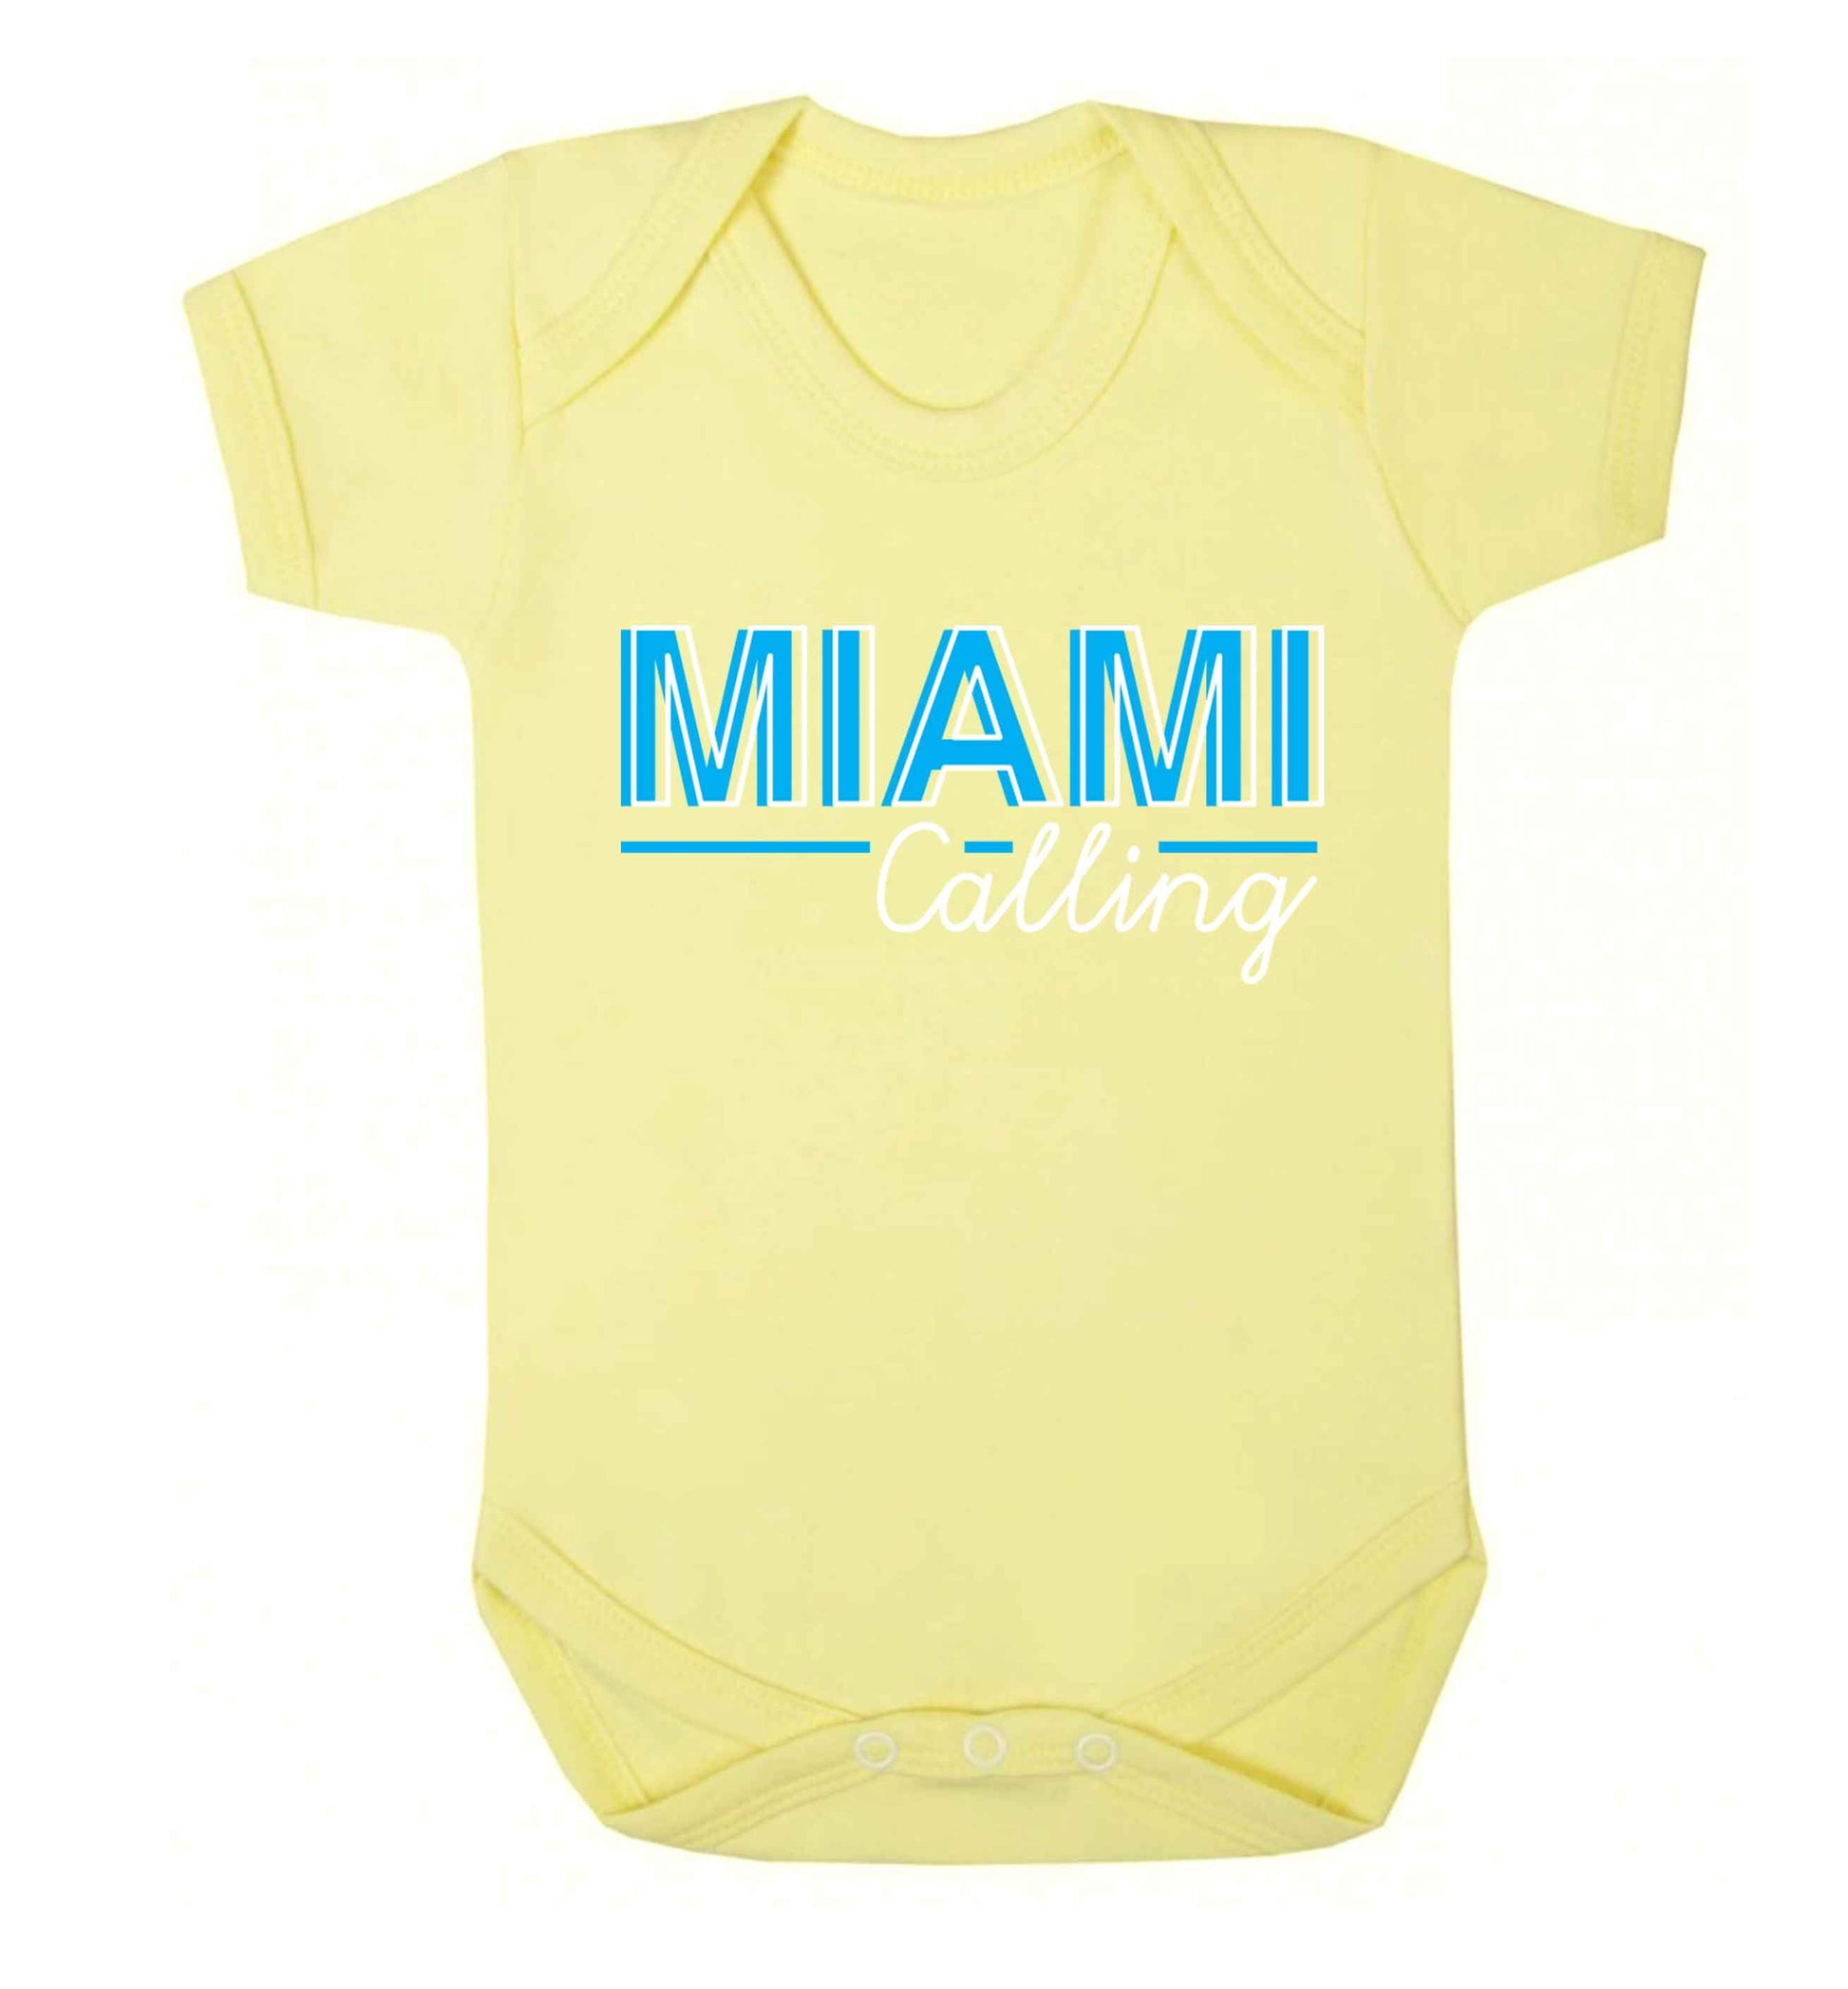 Miami calling Baby Vest pale yellow 18-24 months